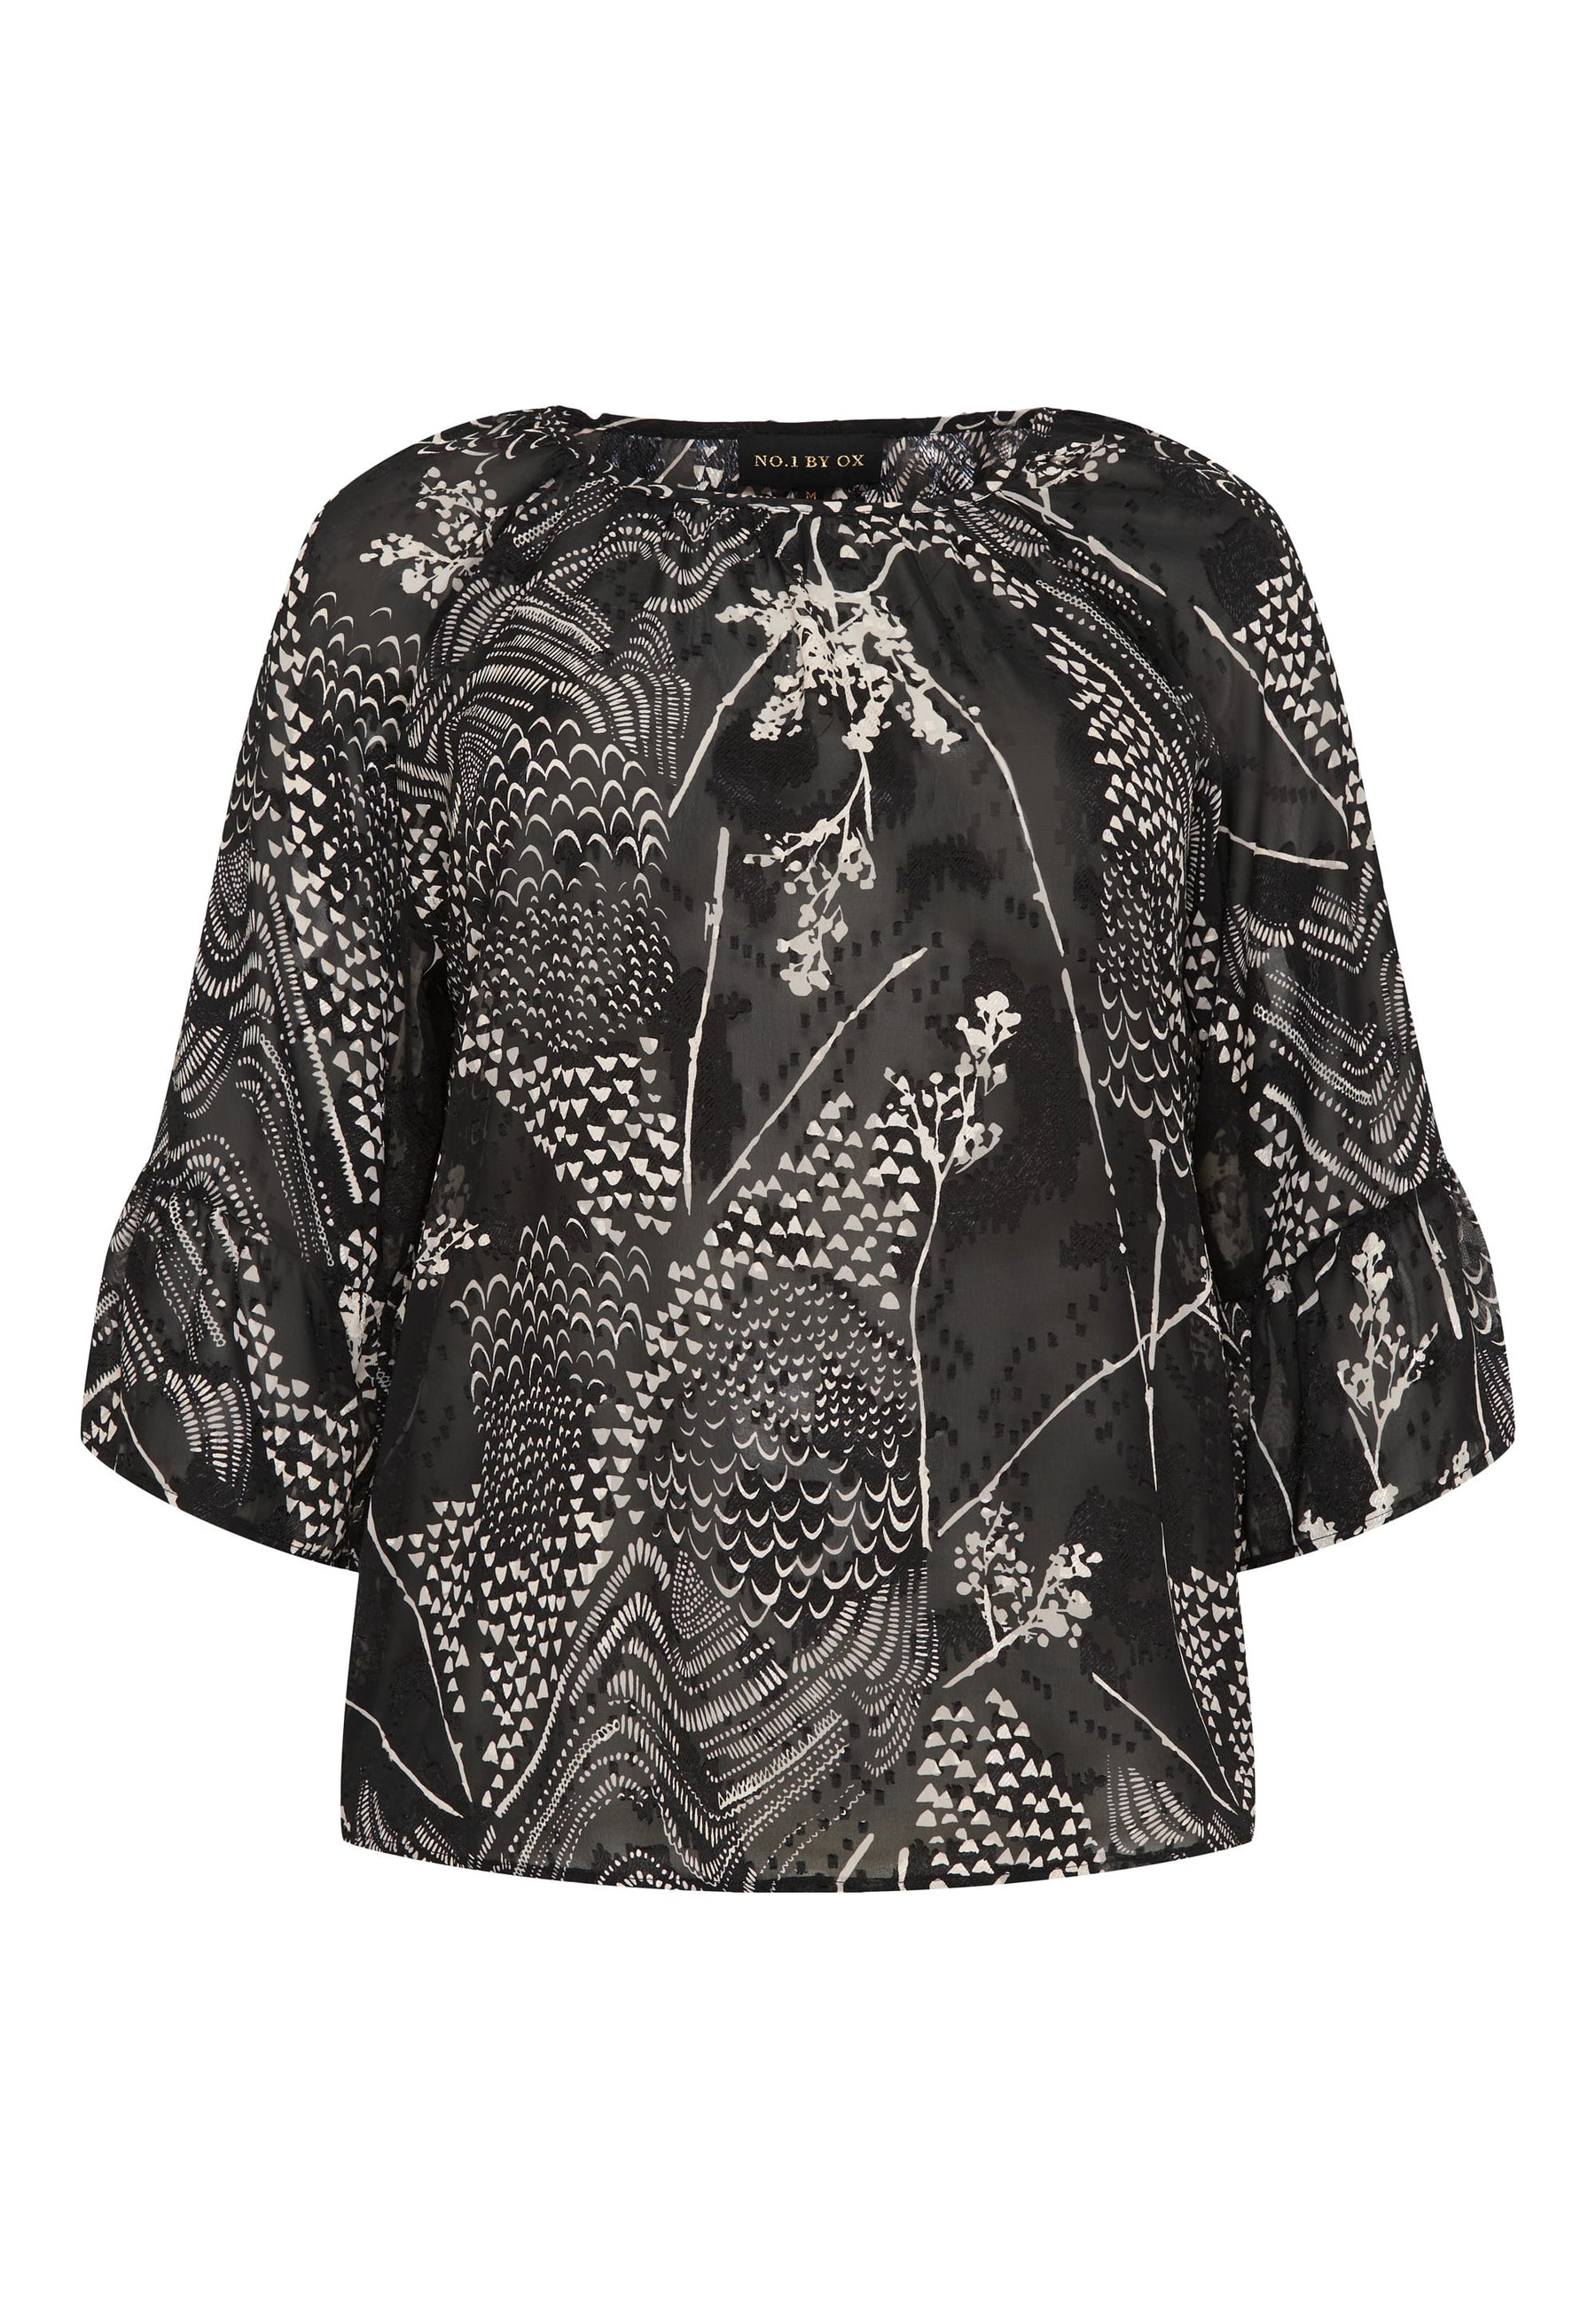 NO. 1 BY OX Chiffon bluse med print Bluser Sort